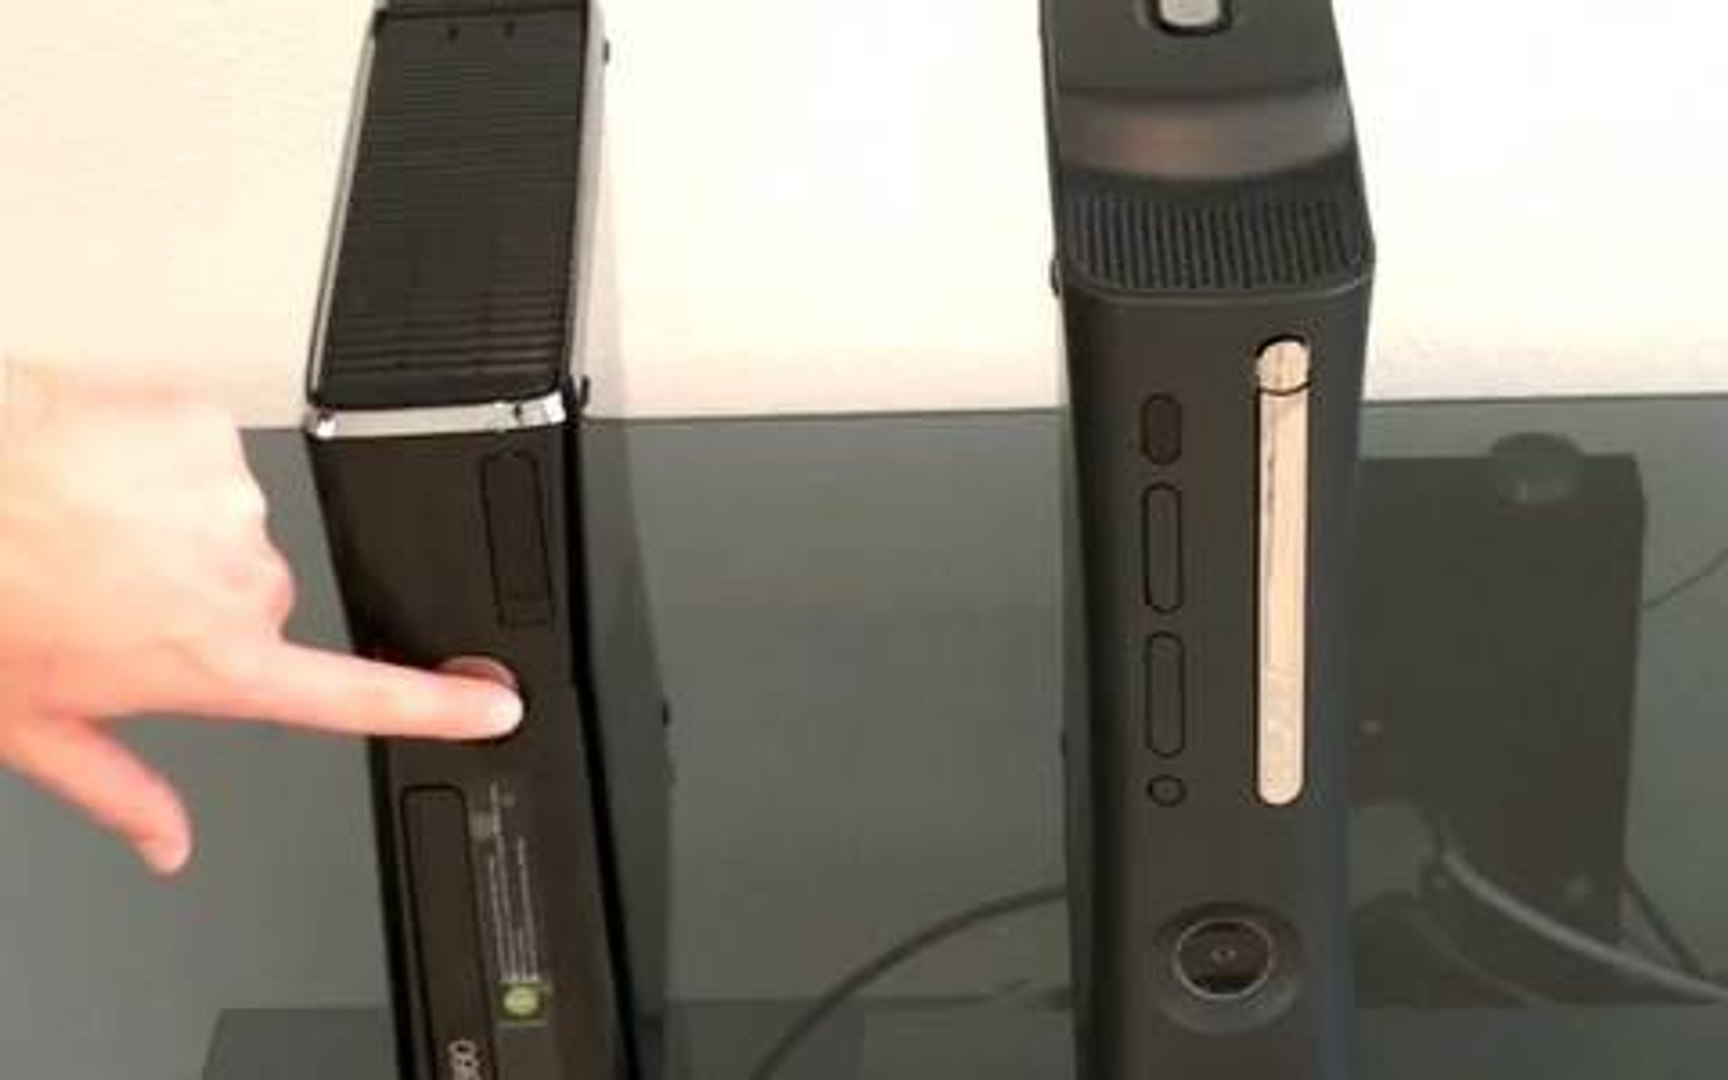 New Xbox 360 Slim Speed Test - Faster? - video Dailymotion